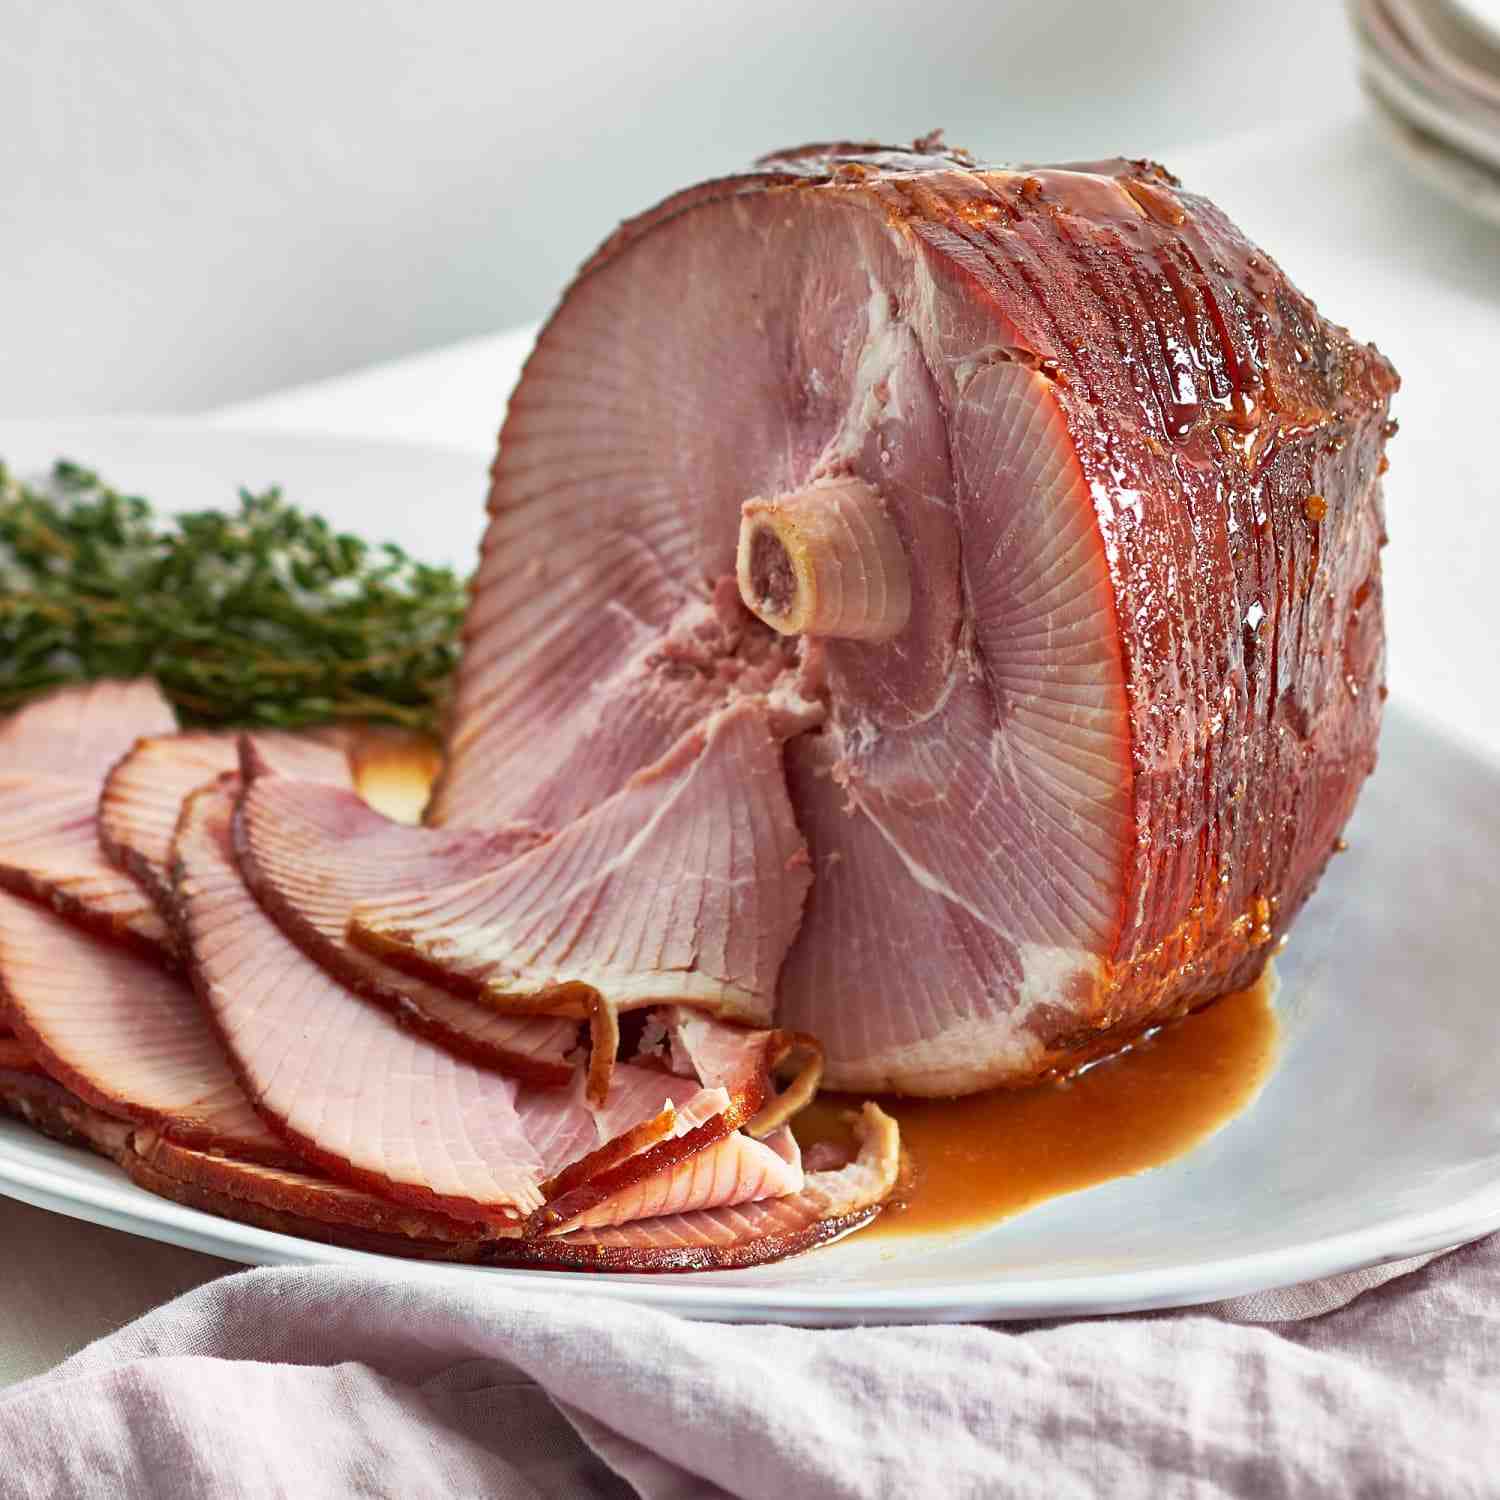 Is there such a thing as uncooked ham?